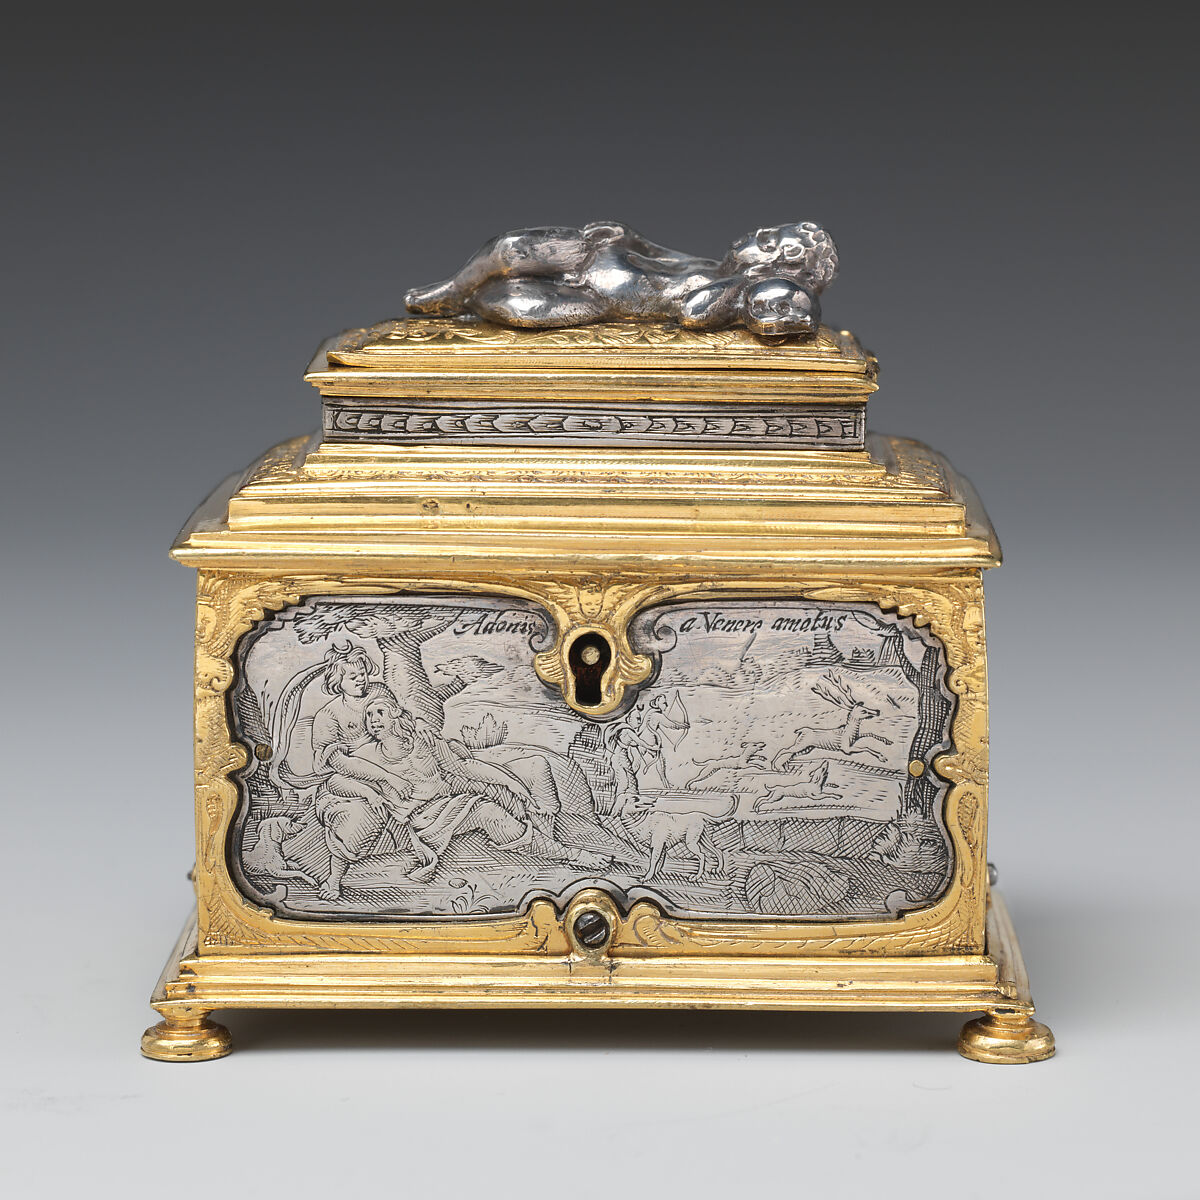 Jewelry box, P. Ben, Silver, engraved; brass, partially gilt, German, probably Nuremberg or Flemish